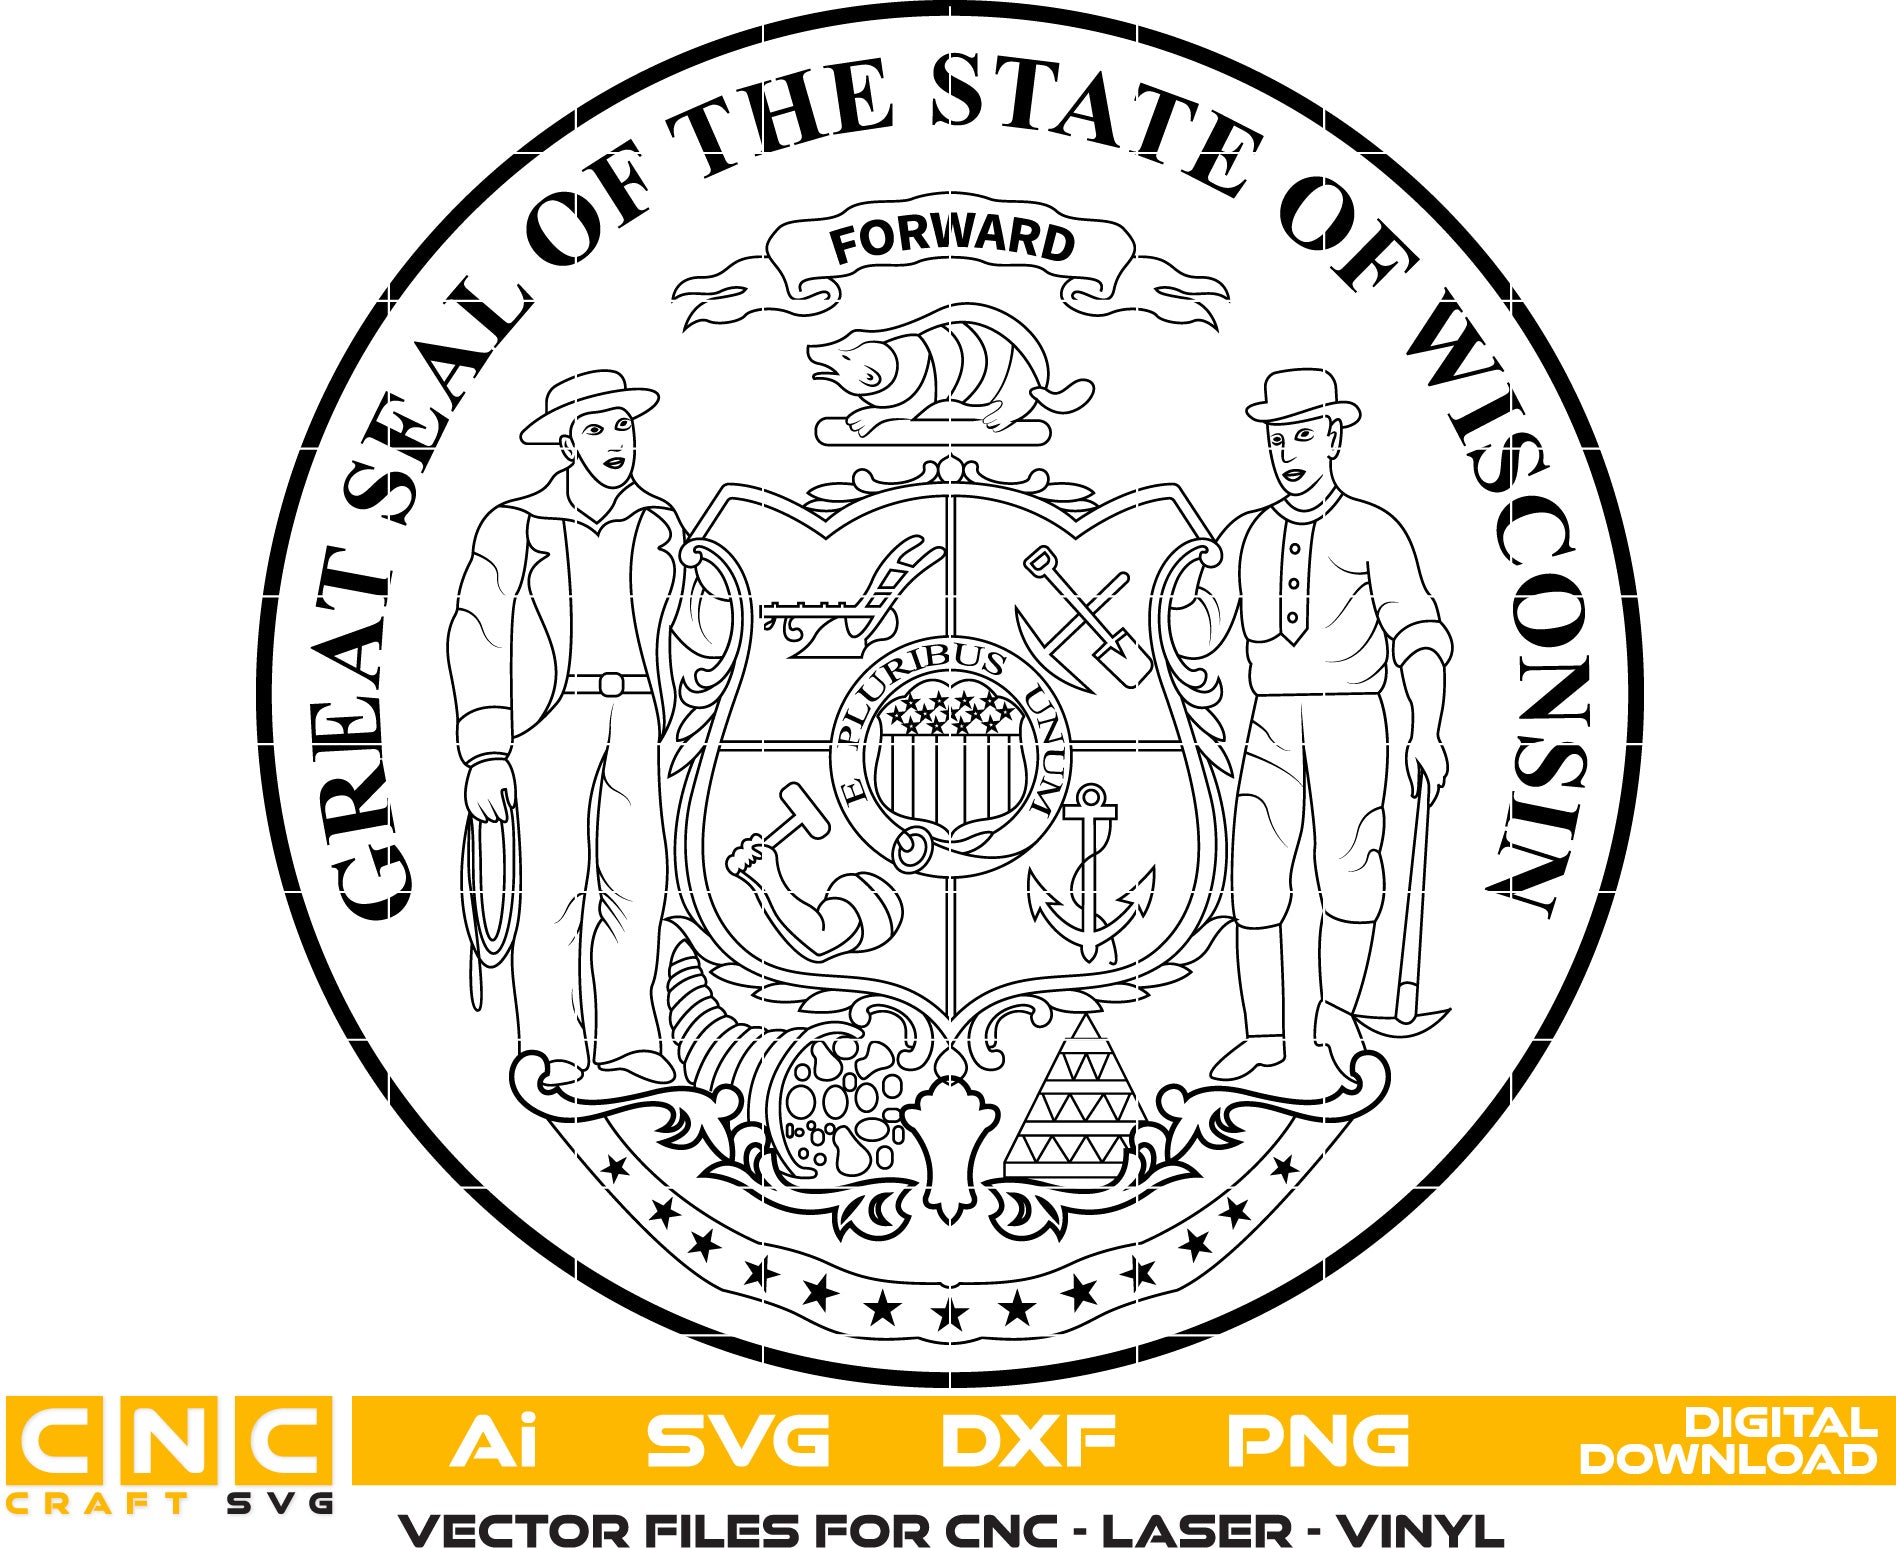 State of Wisconsin Seal Vector Art, Ai,SVG, DXF, PNG, Digital Files